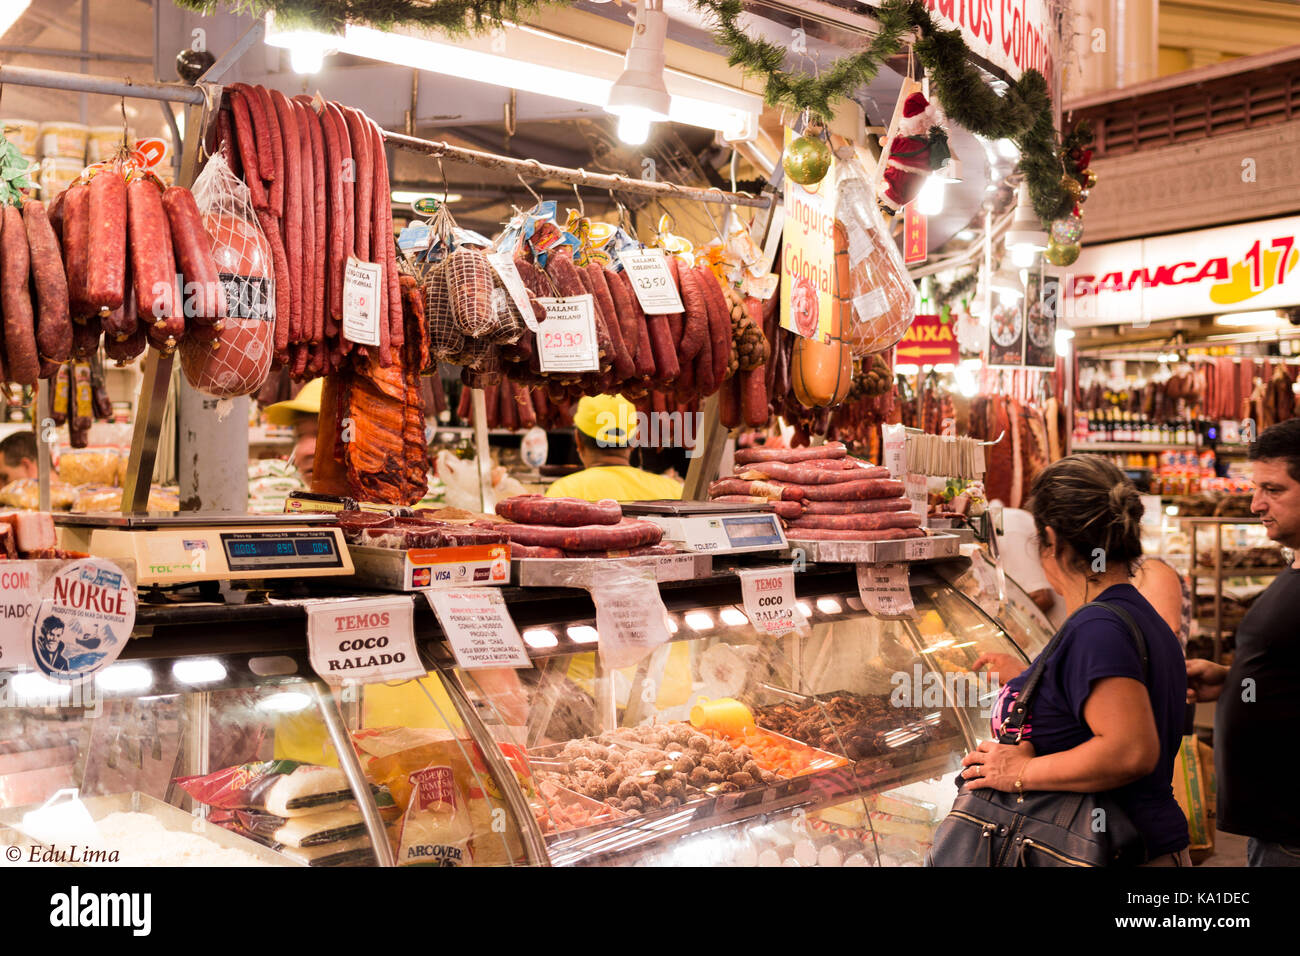 Brazilian Public market stand selling all sort of beef, pork meat, sausages, chicken parts and many more groceries Stock Photo